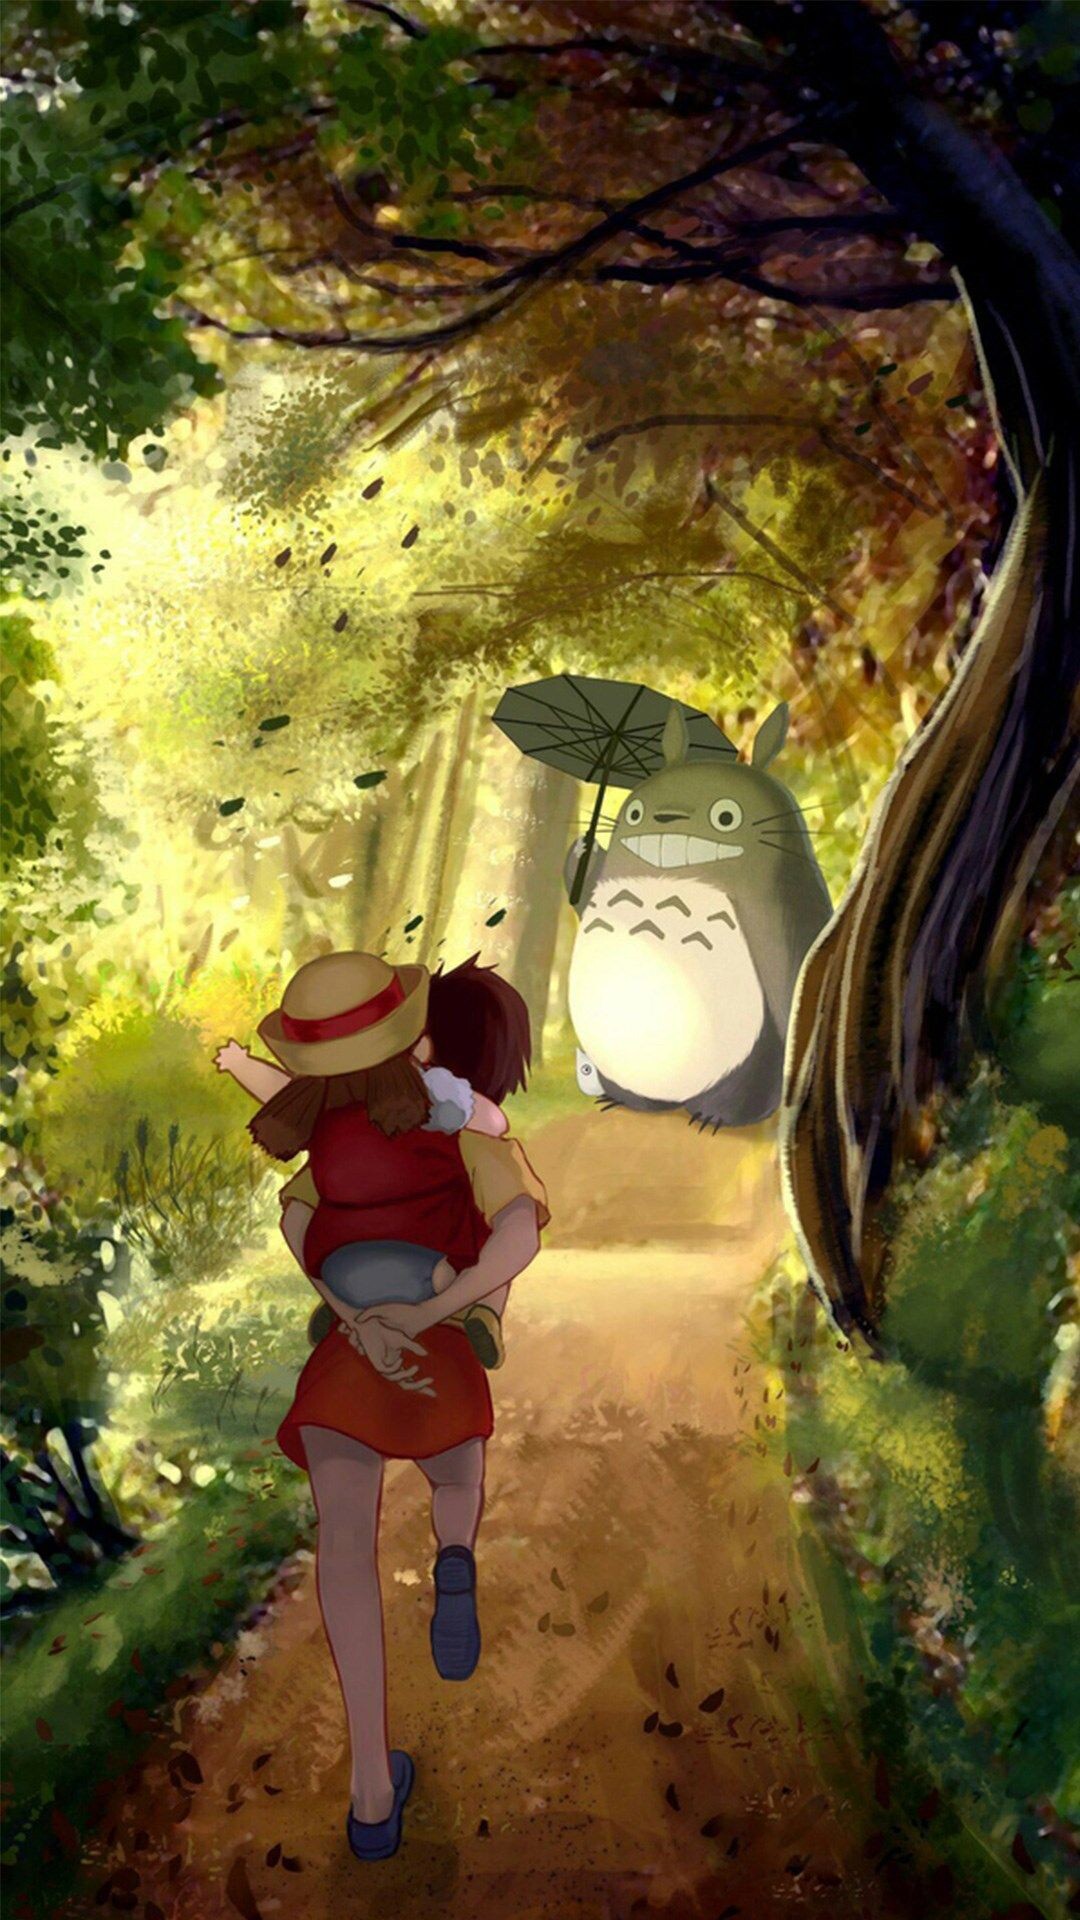 Studio Ghibli: Most popular merchandise items include plush toys of characters Totoro and No-Face. 1080x1920 Full HD Wallpaper.